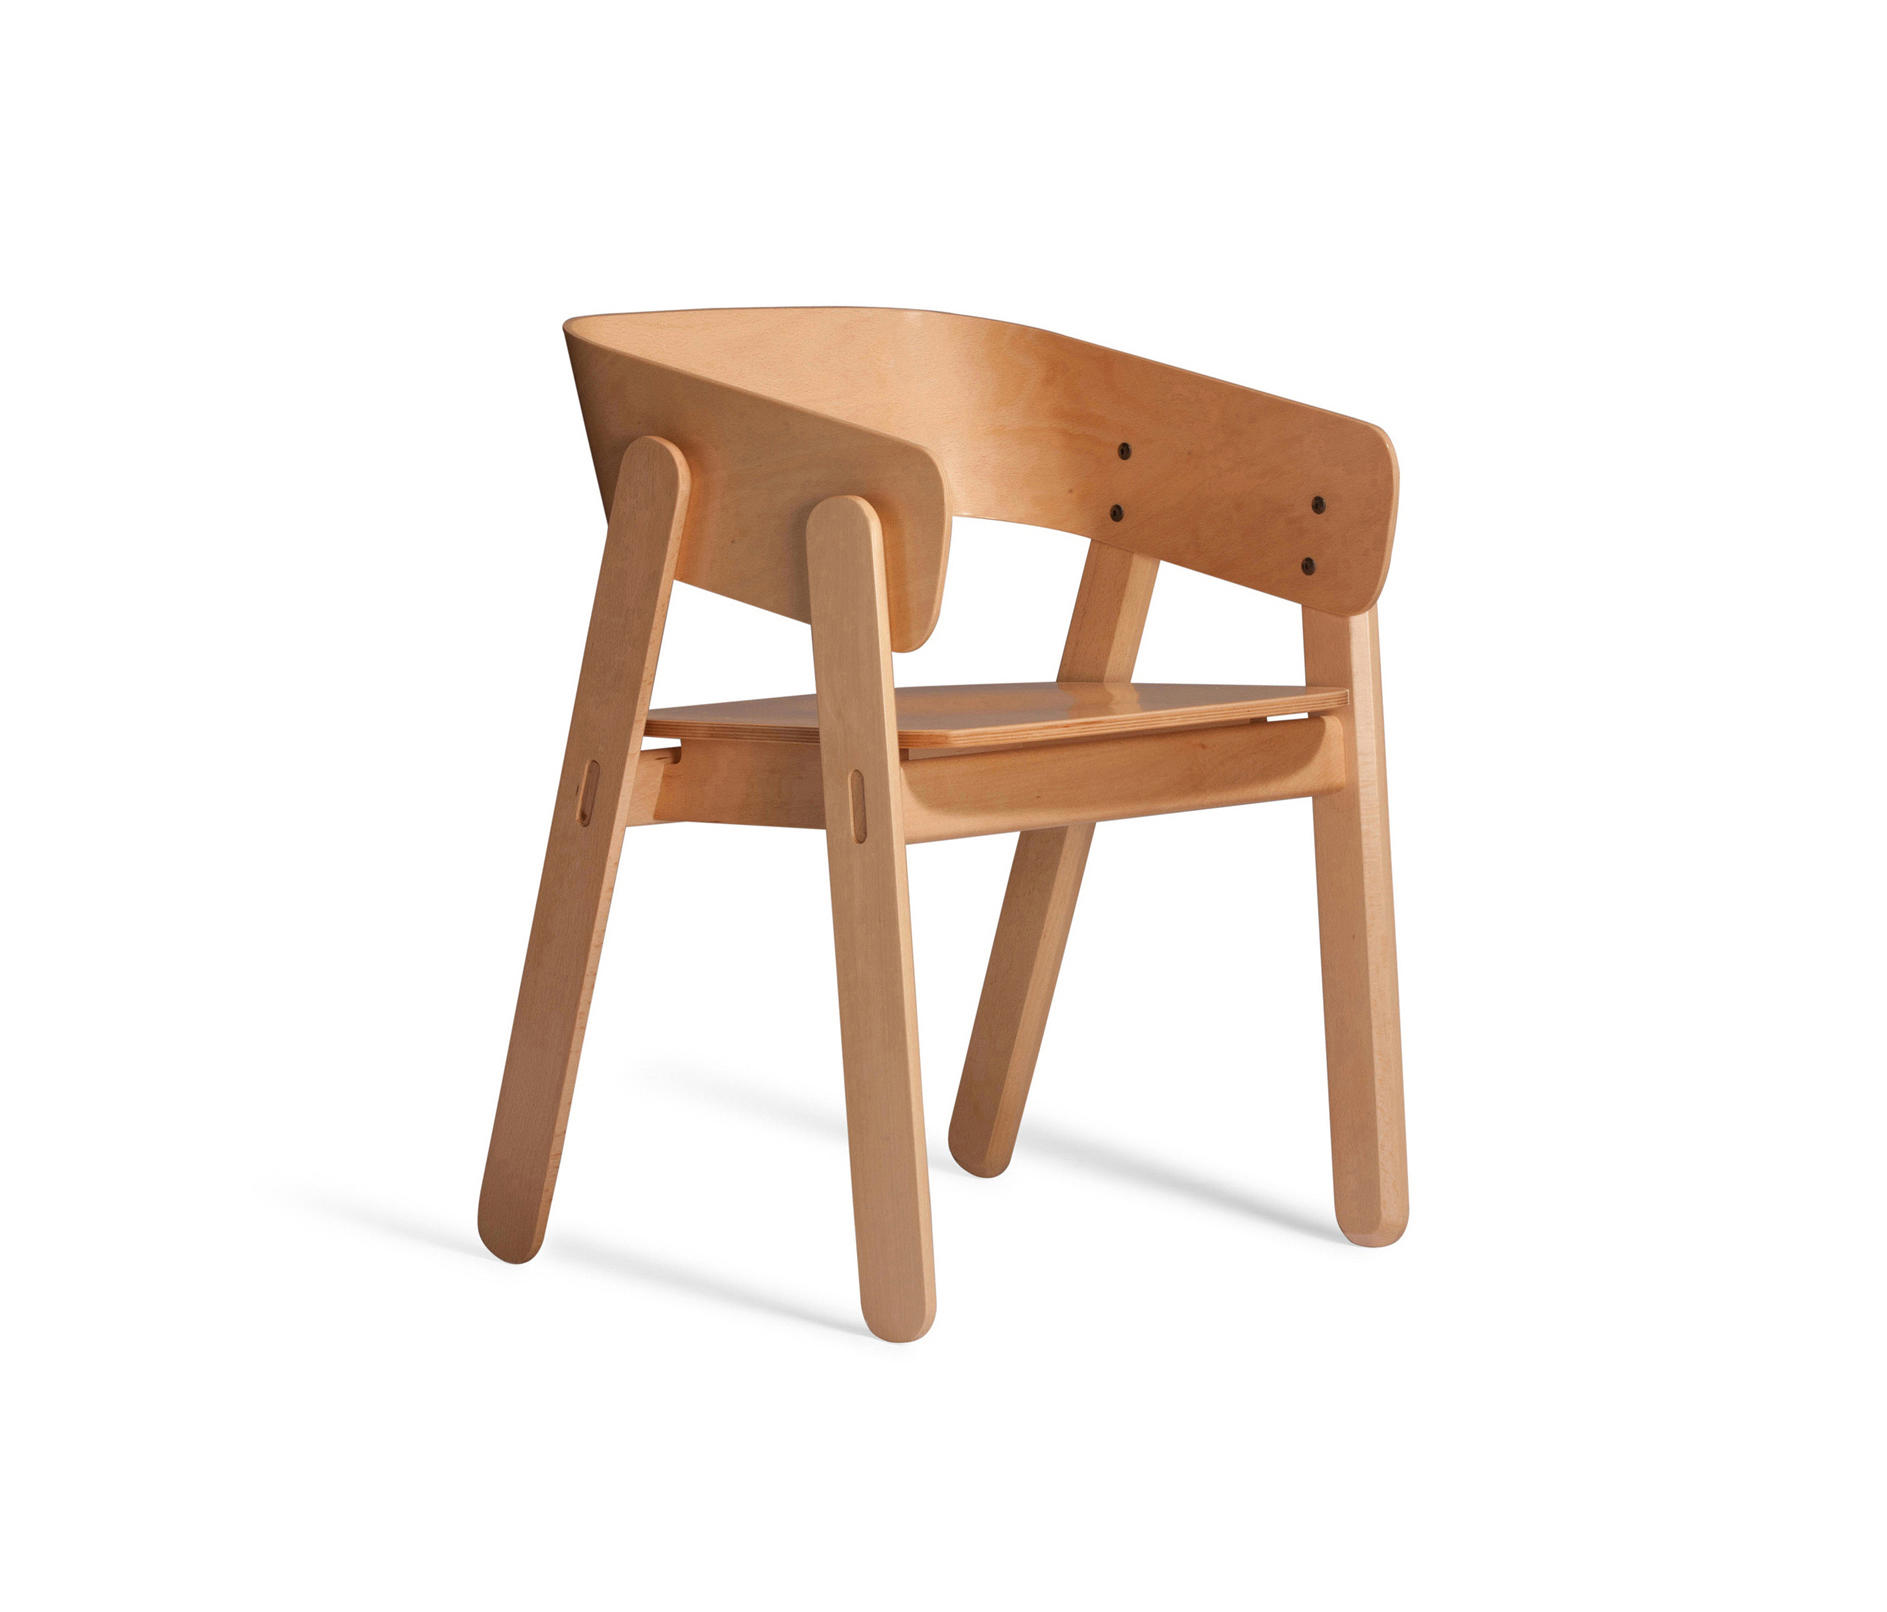 POLO 515 M - Chairs from Capdell | Architonic